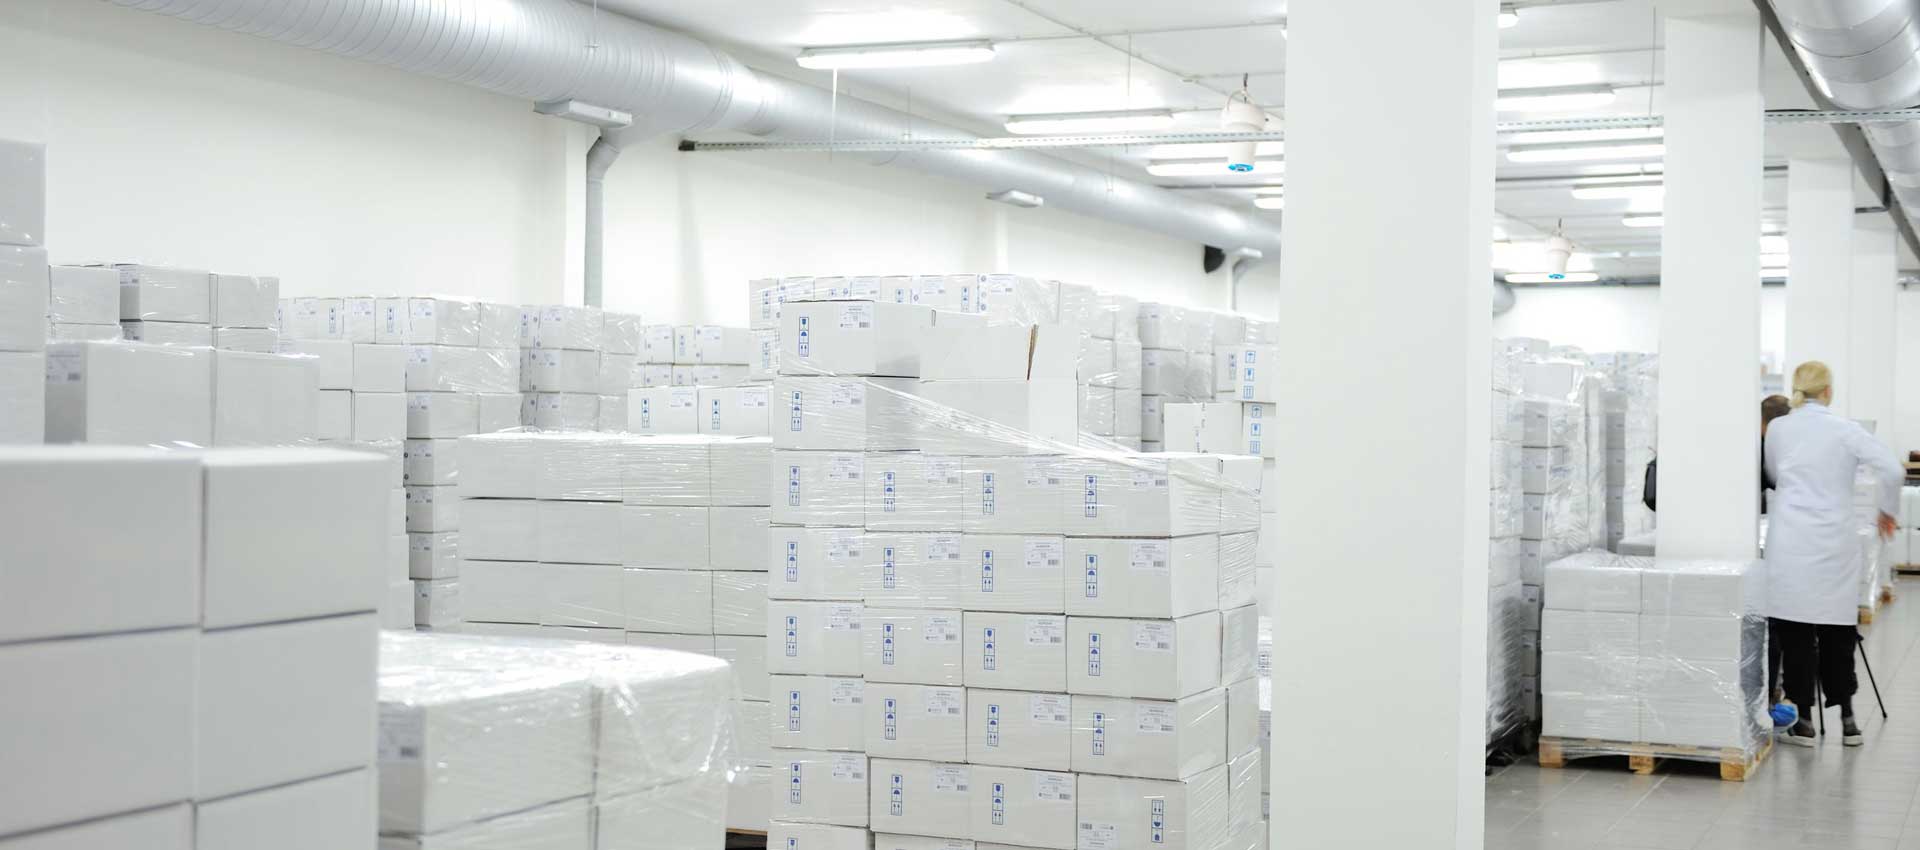 Airius PureAir PHI Air Purification System Installed In Pharmaceutical Warehouse